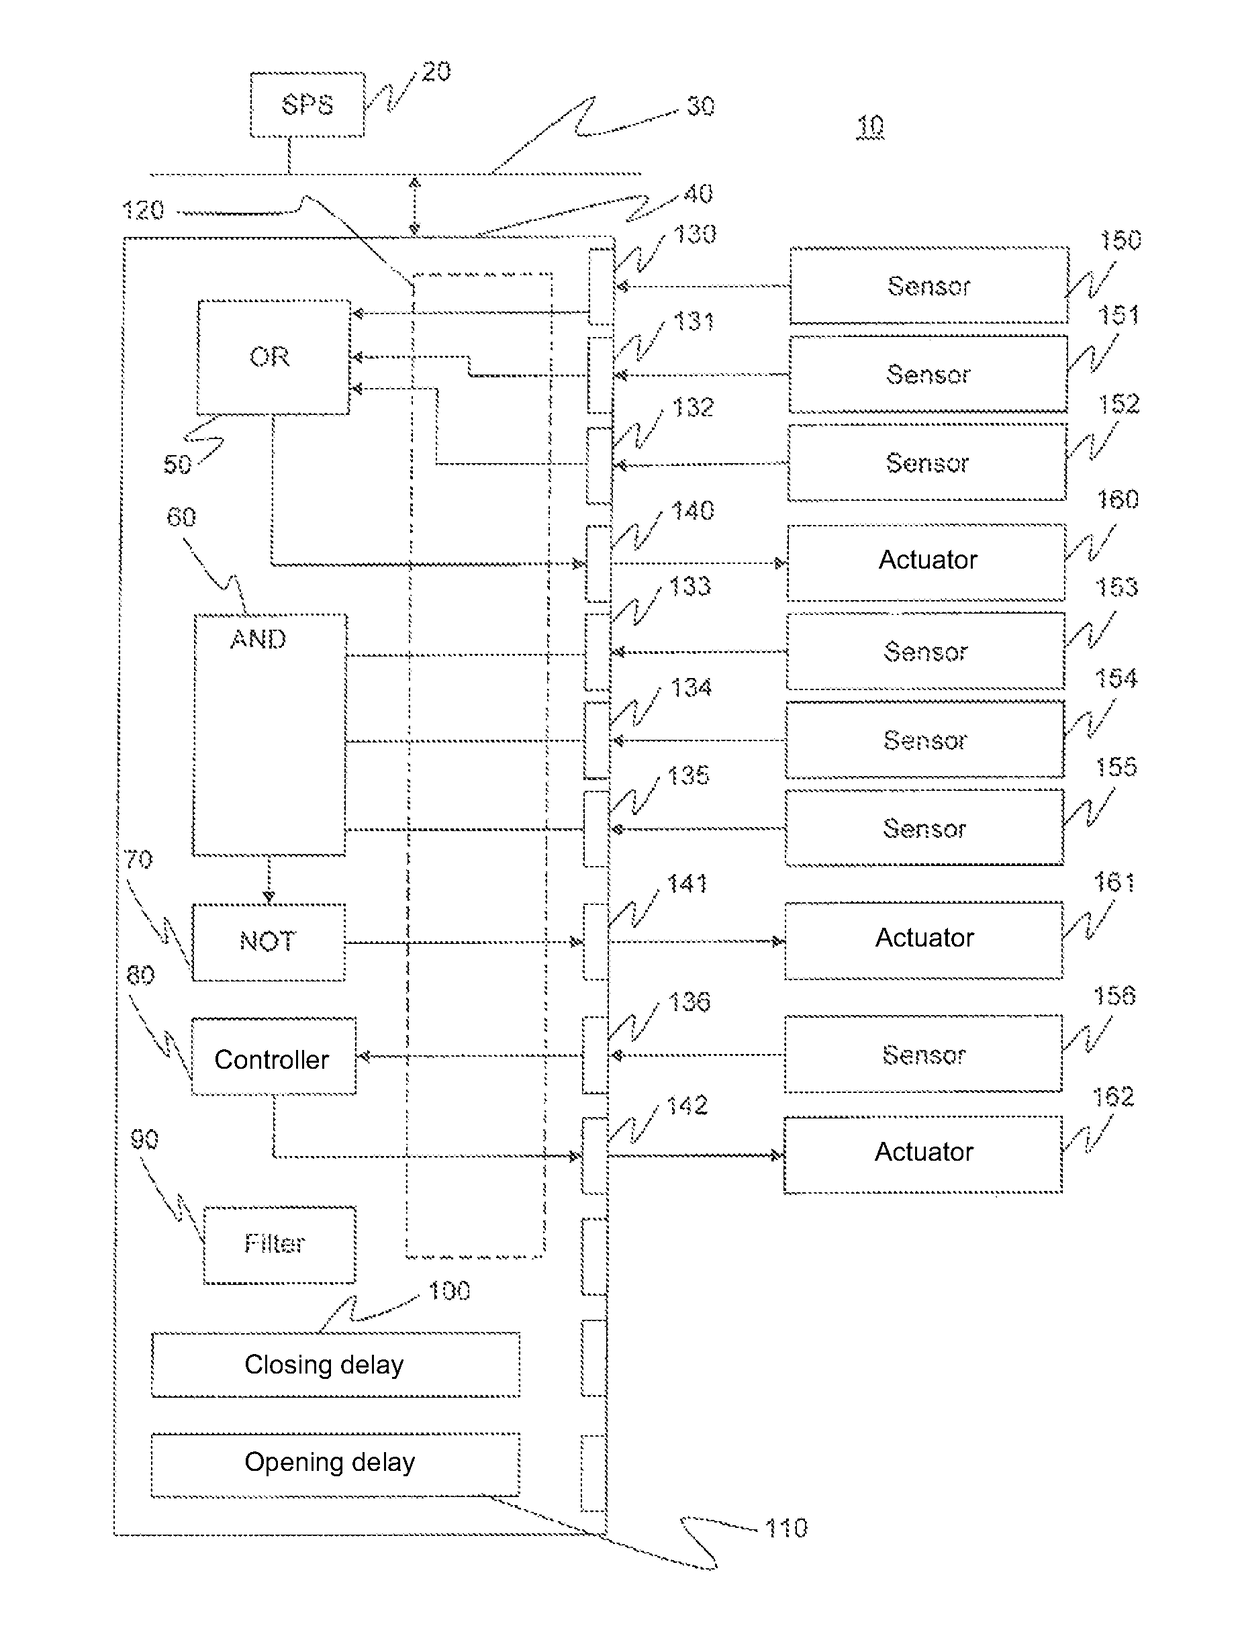 Communication system for connecting field devices to a higher-order control device